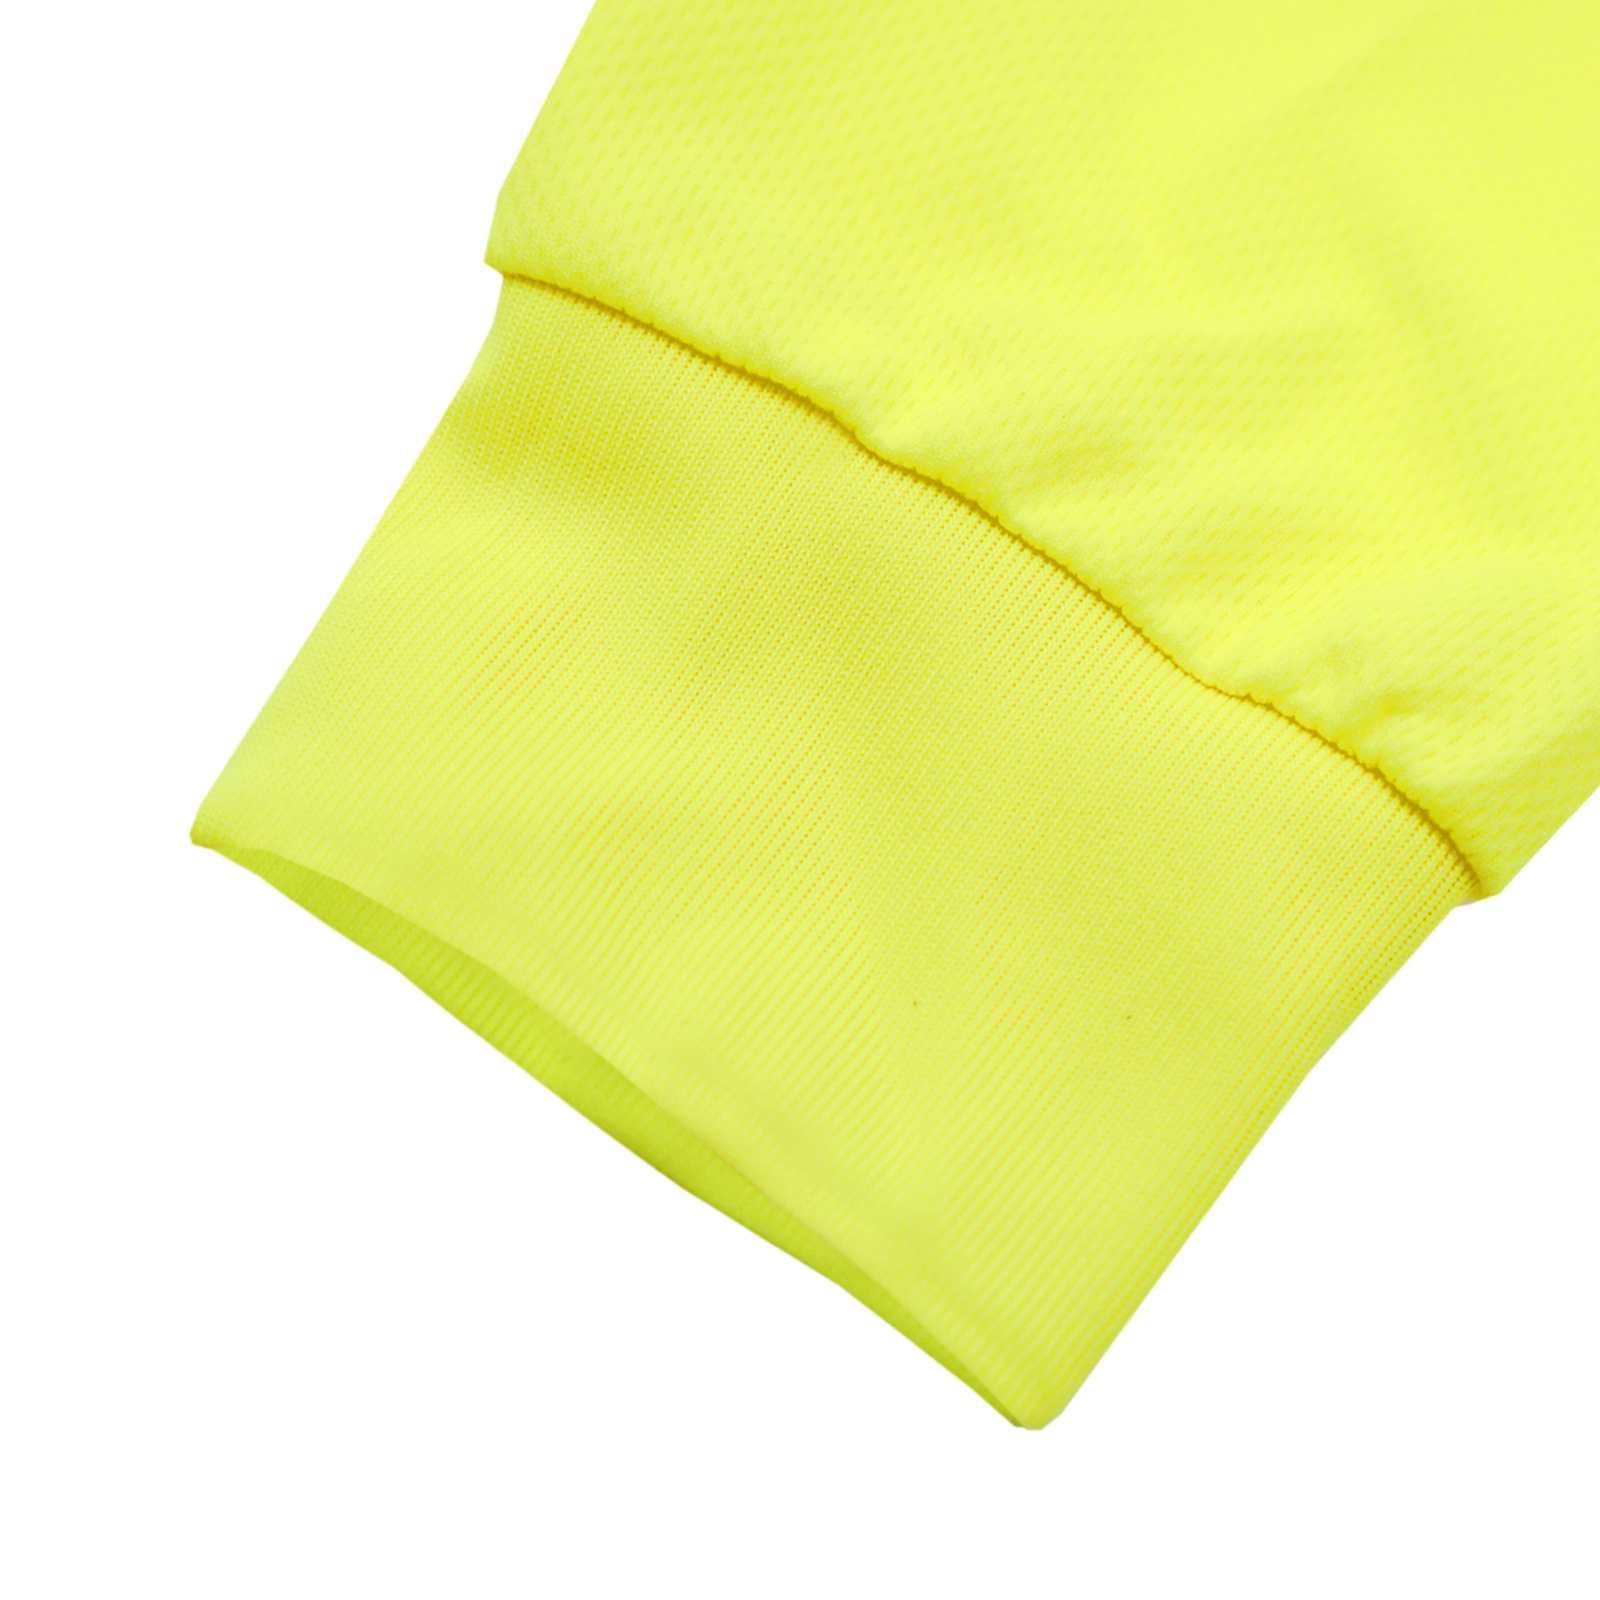 Close up of the elastic cuff on the JORESTECH long sleeve yellow/lime hi vis shirt